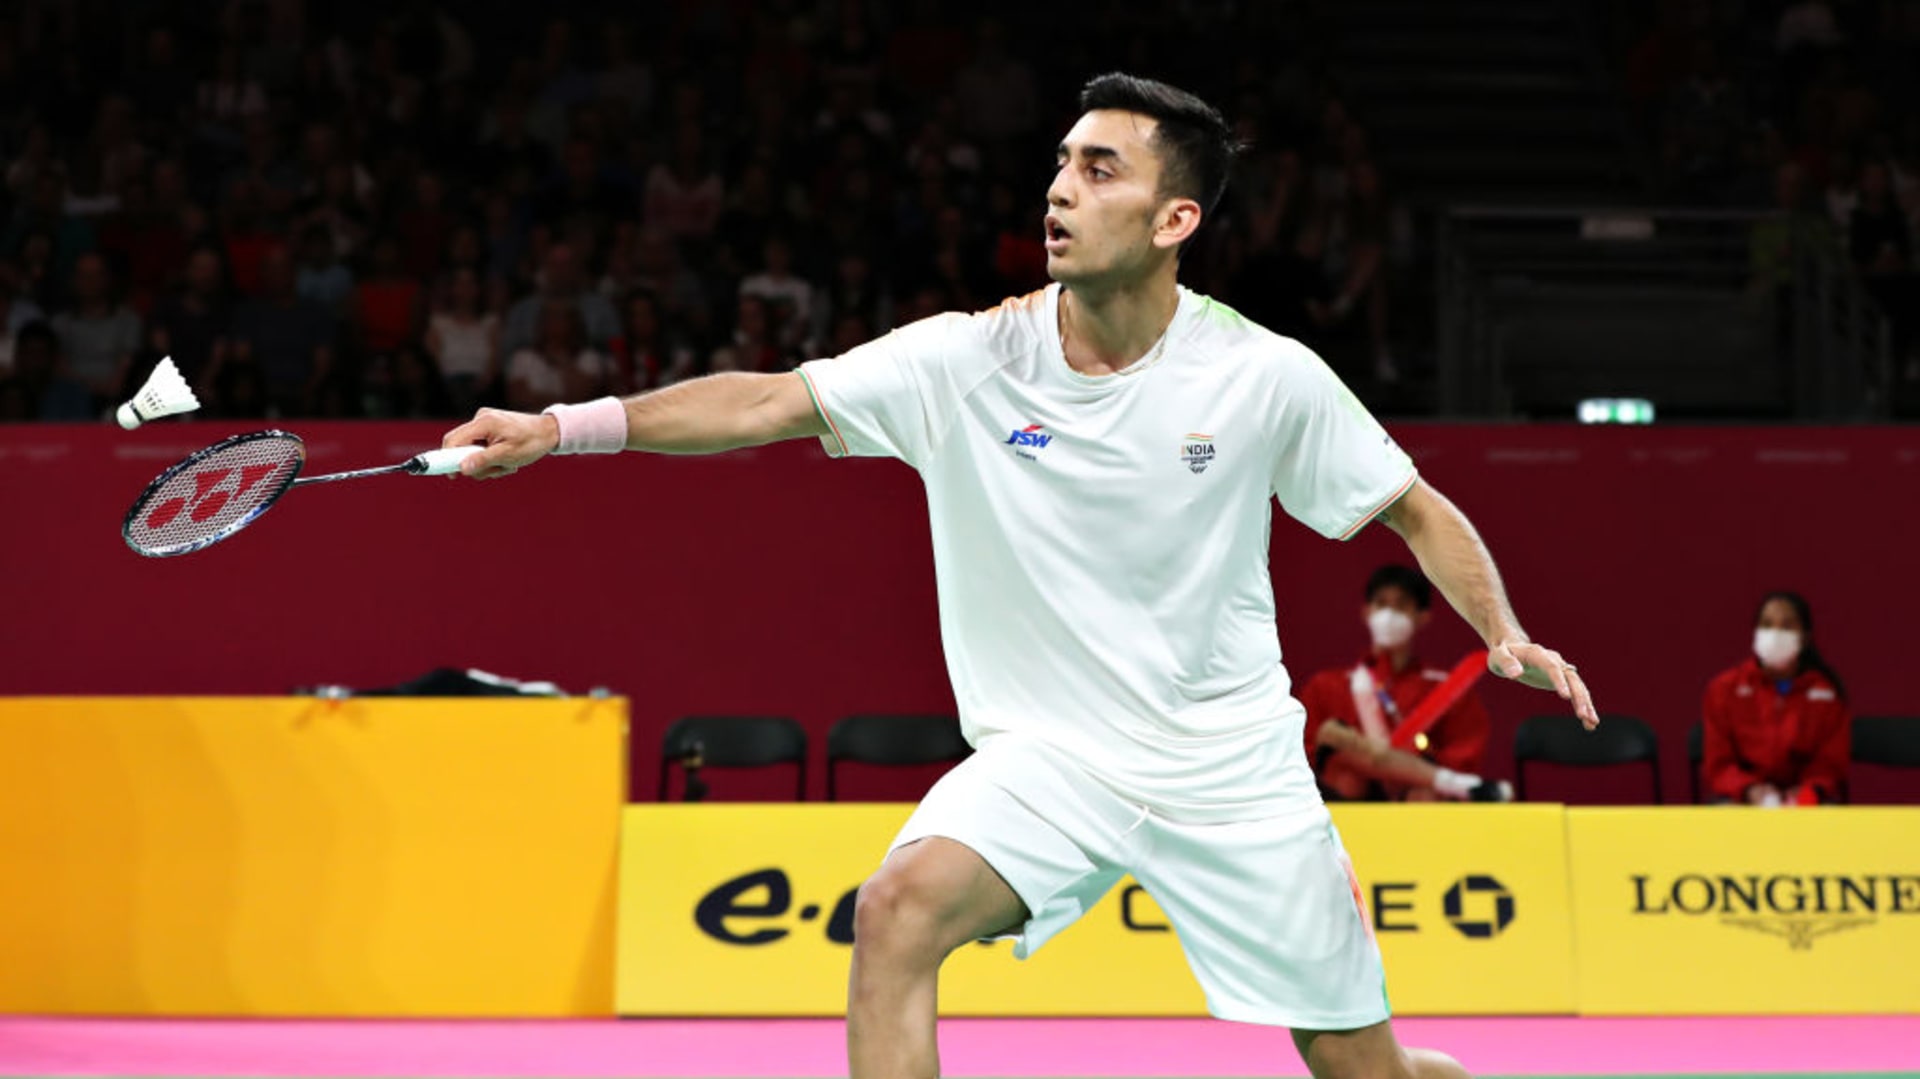 Japan Open 2022 badminton Watch live streaming and telecast in India